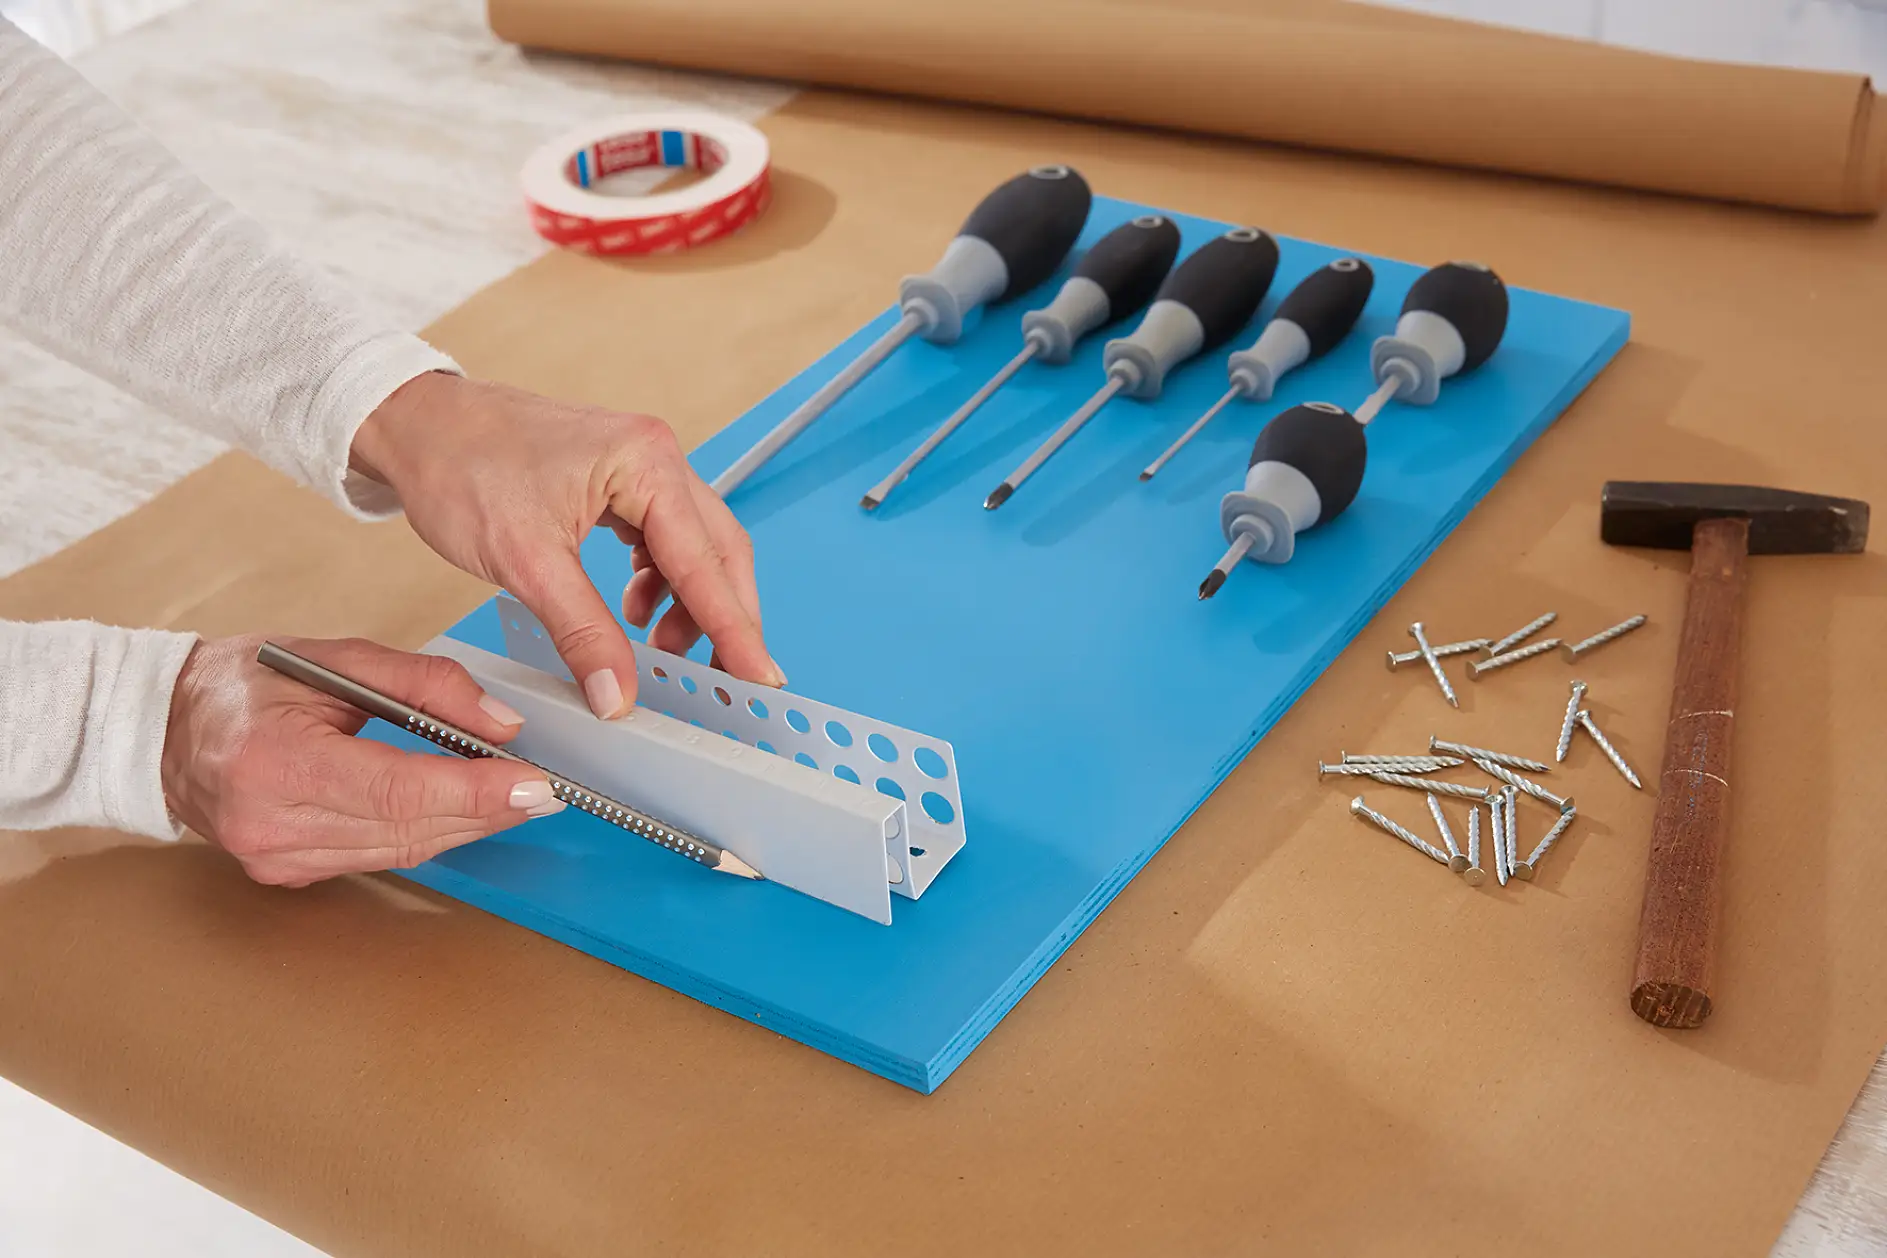 Evenly distribute the tools and holders on the panels and slightly mark their positions with a pencil.